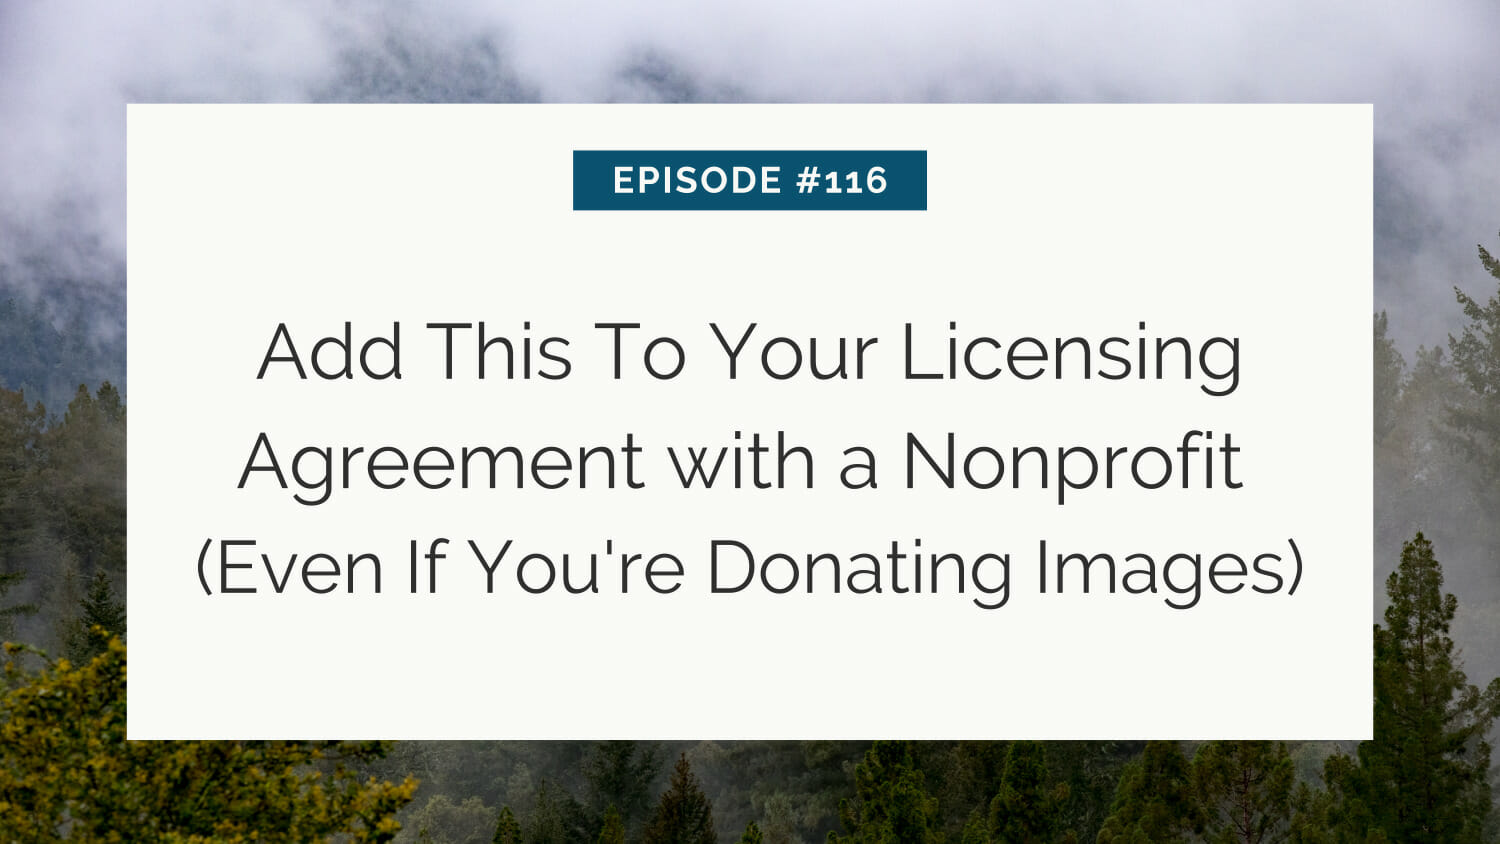 Podcast episode 116: insight on including licensing terms for donated images in nonprofit agreements.